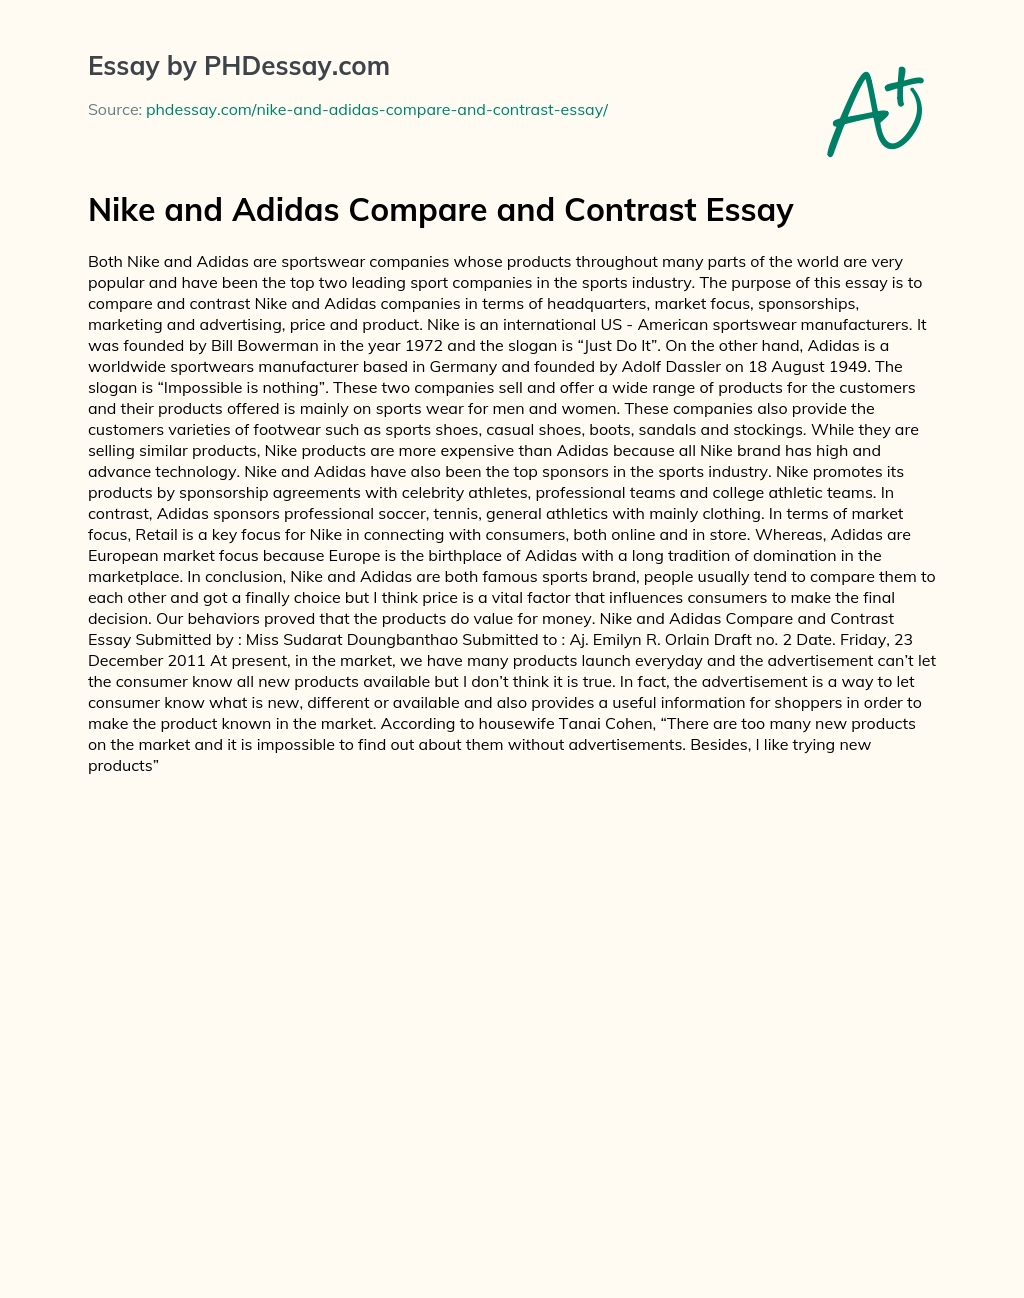 Nike and Adidas Compare and Contrast Essay essay